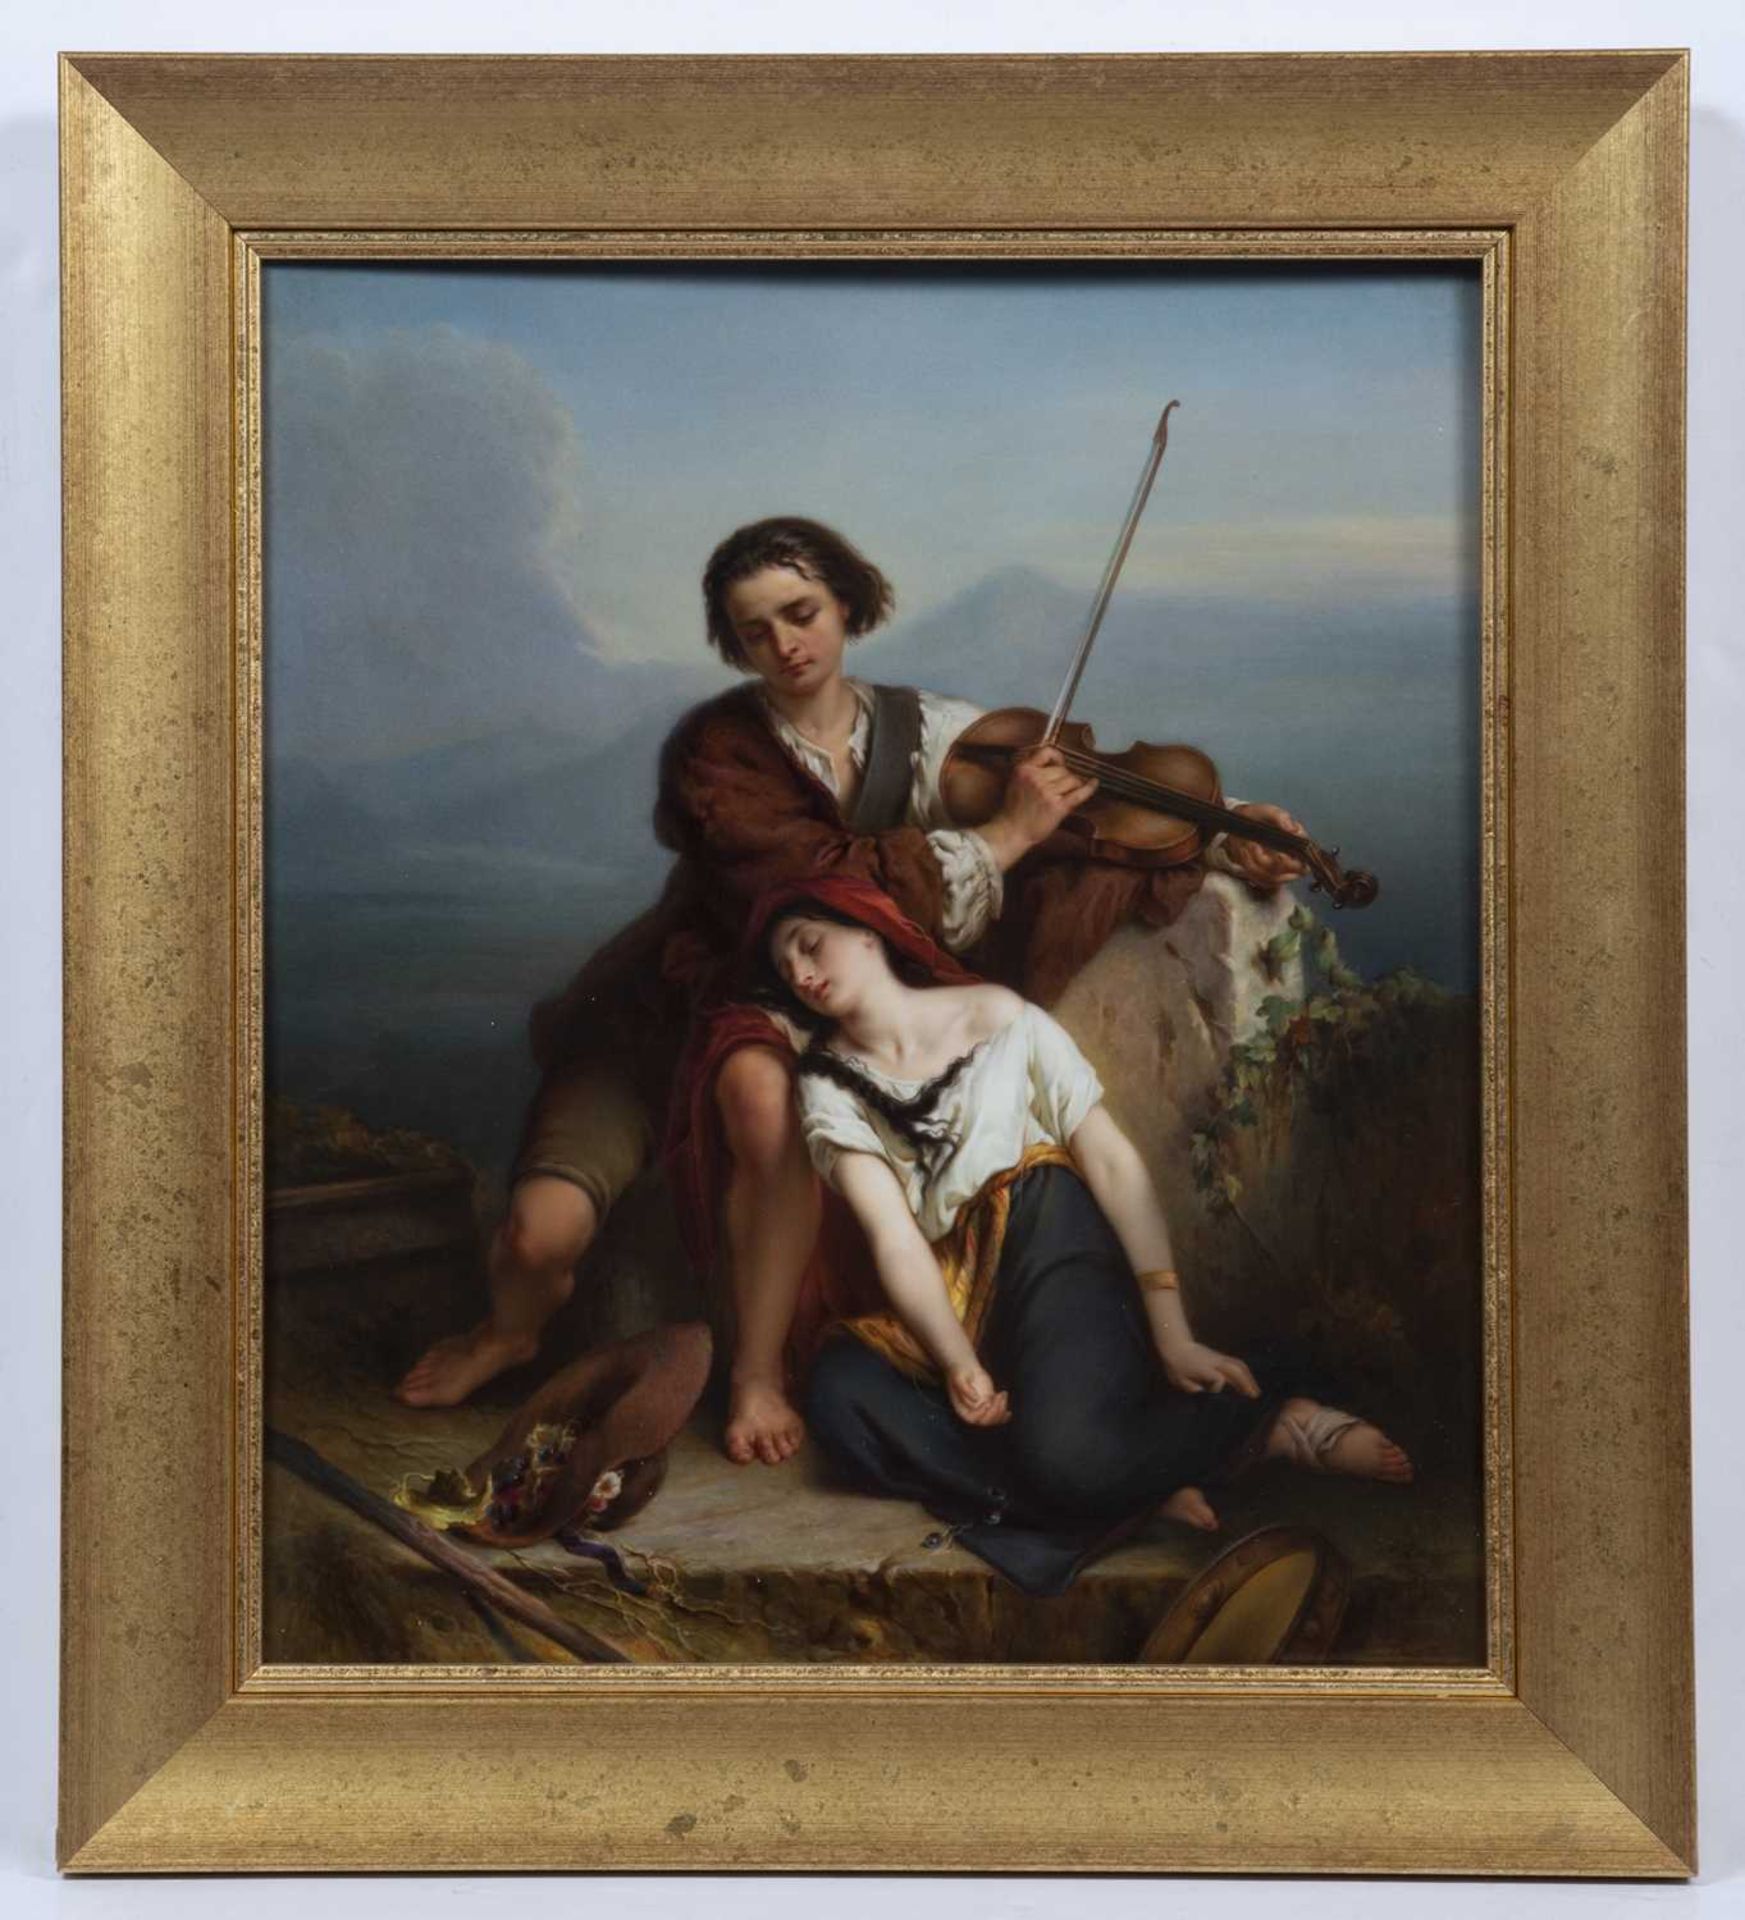 Berlin KPM porcelain plaque 19th Century, 'The Violin Recital' painted with a young man playing a - Image 2 of 6